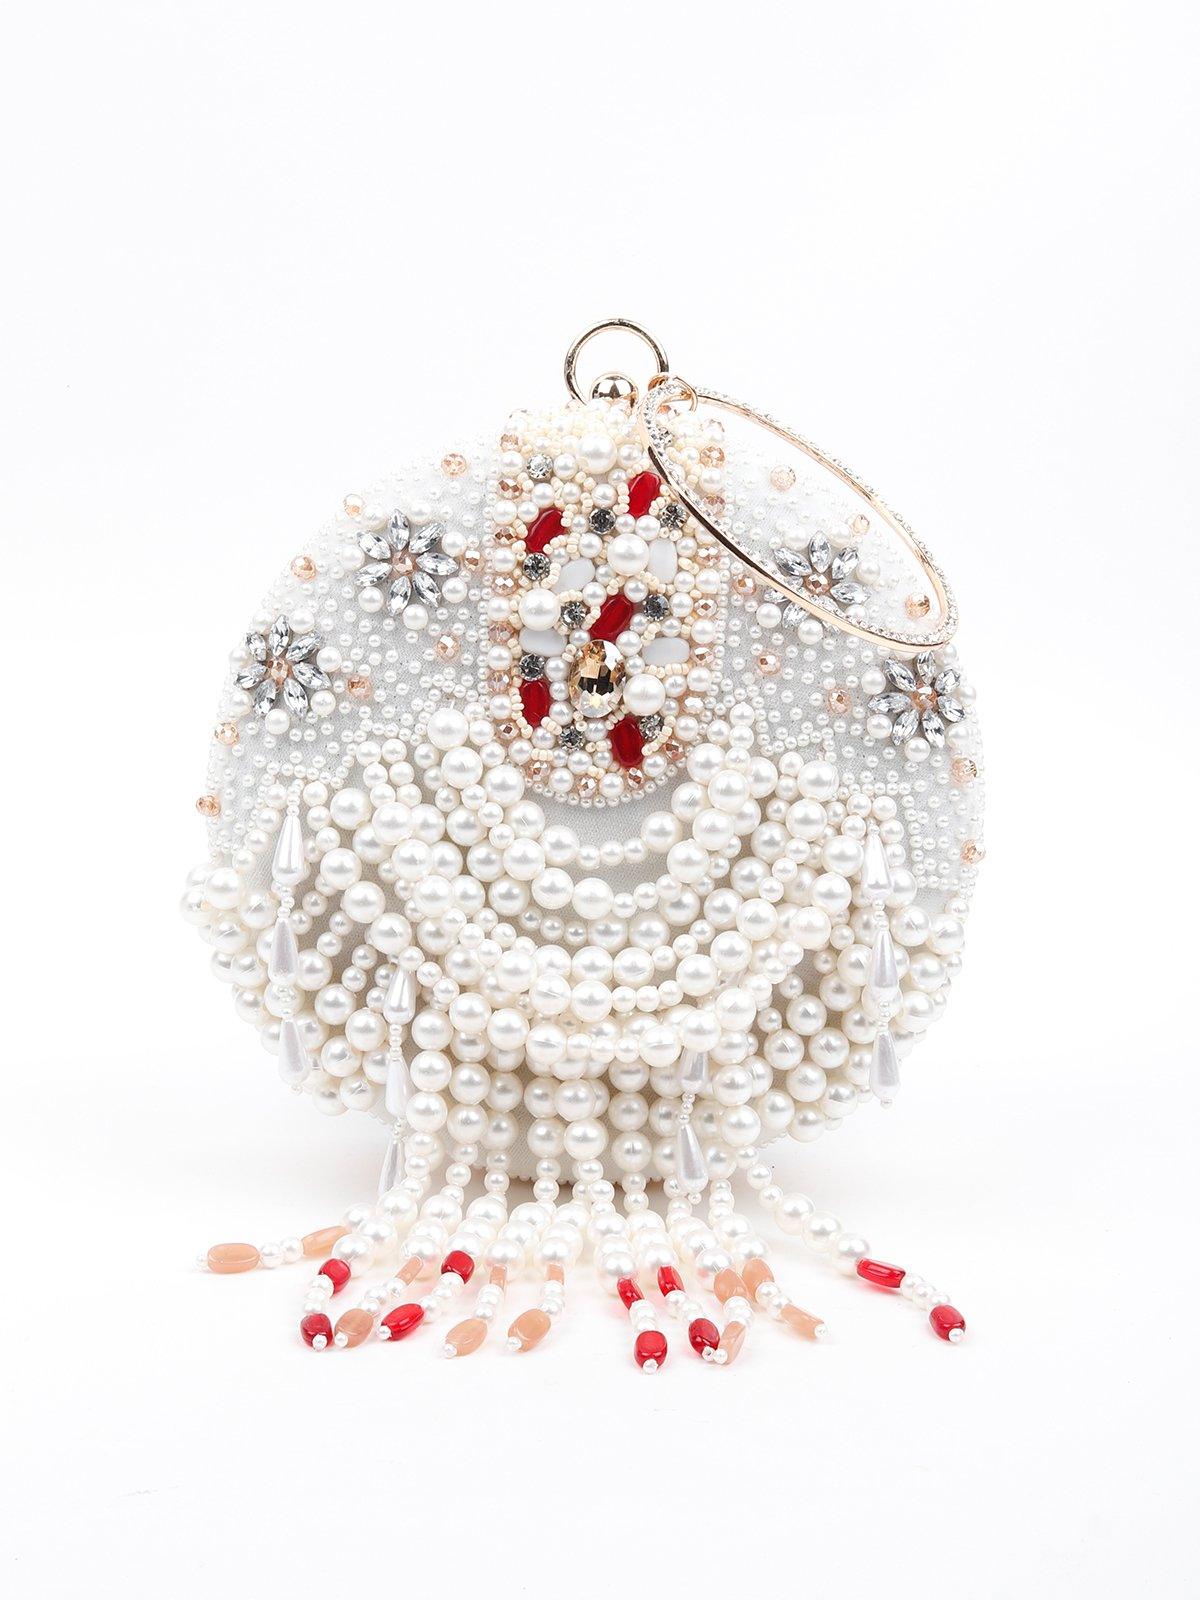 Heavily Embellished With Pearl And Beads Spherical Clutch - Odette